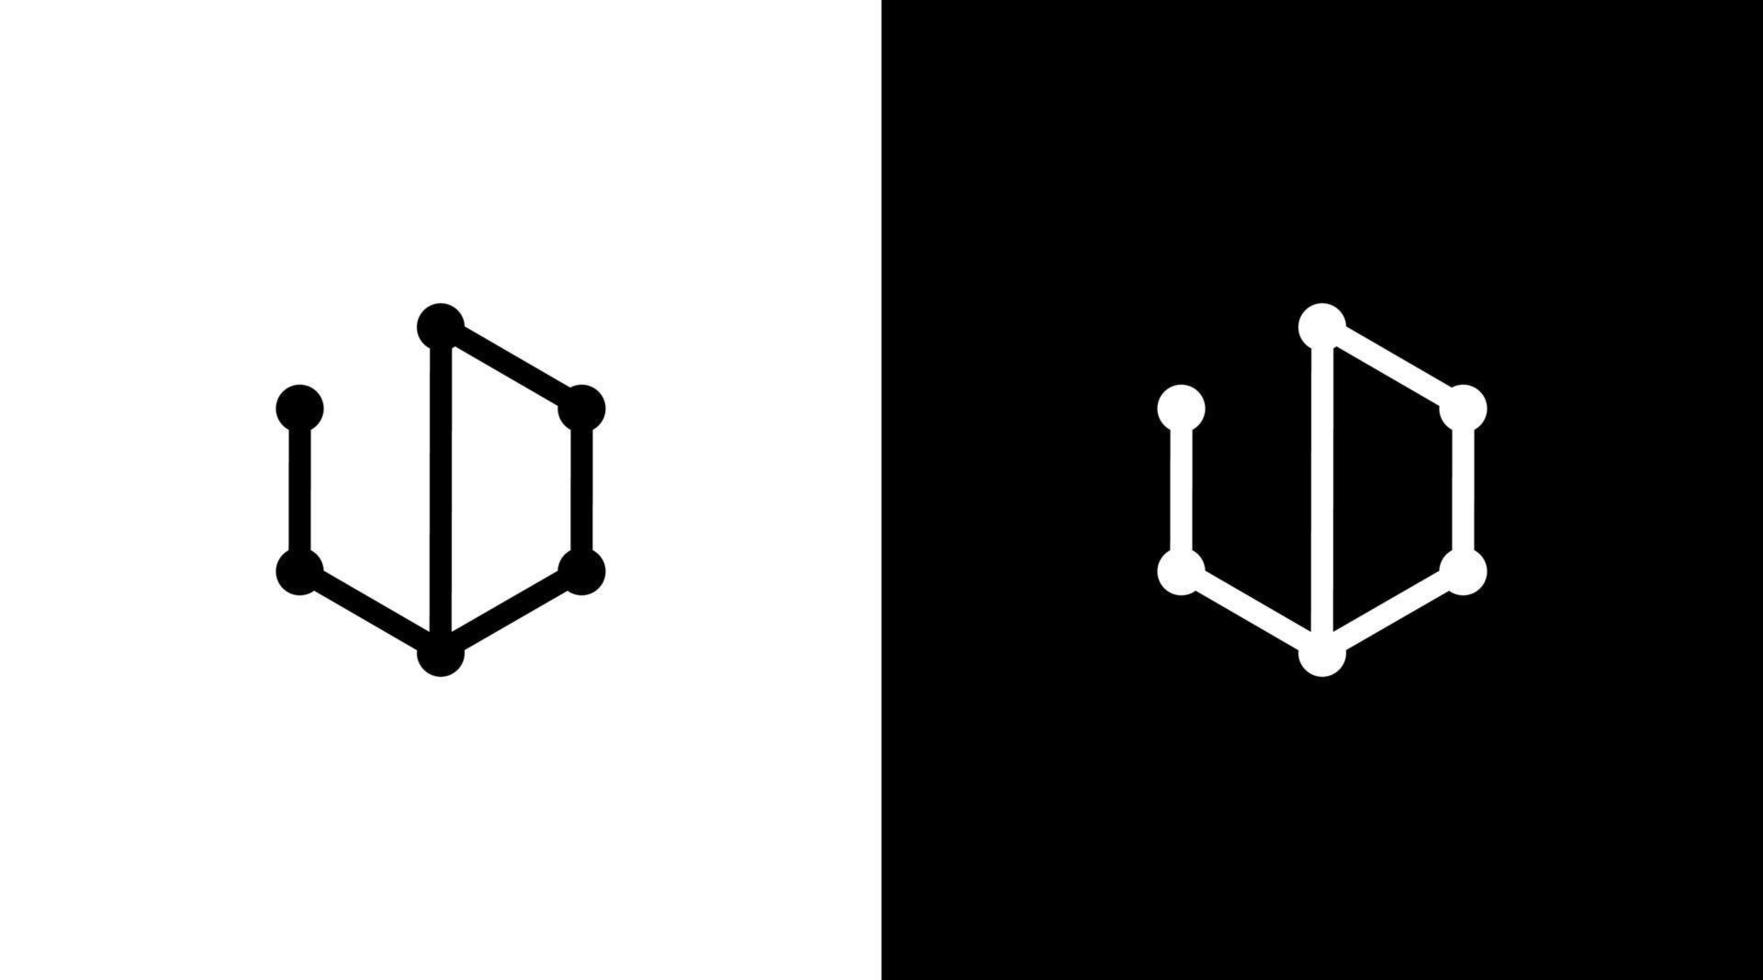 hexagon logo technology cube black and white icon illustration vector style Designs templates